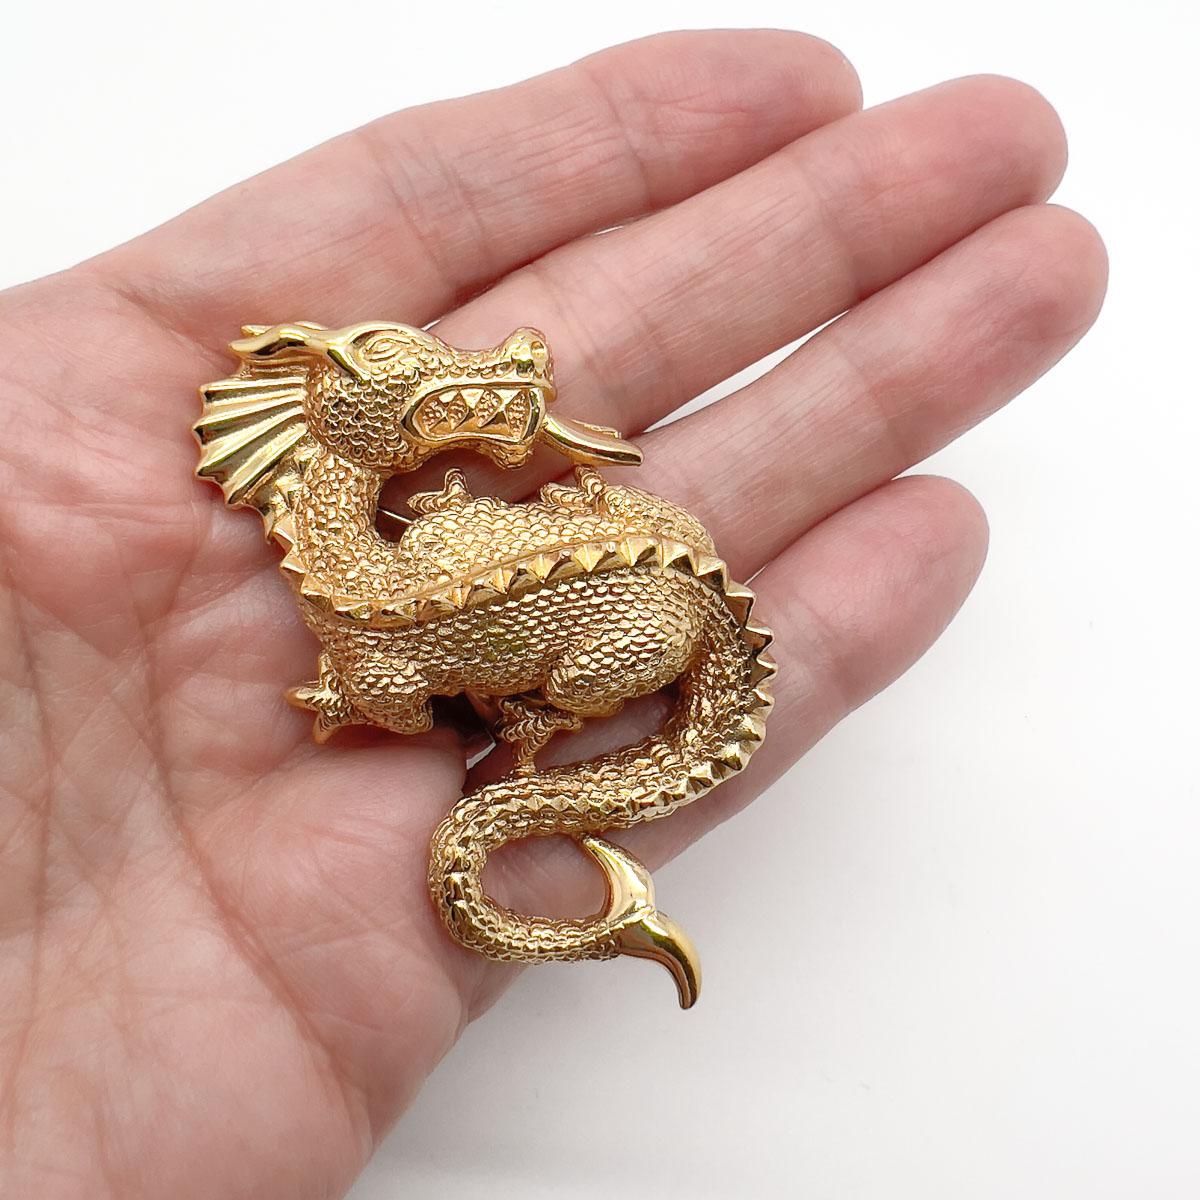 A wonderfully magical Vintage Christian Dior Dragon Brooch that is sure to be a conversation piece as well as an adorable piece of wearable art. Mythological designs have occupied the minds of Dior designers since the early days of the 1950s and so